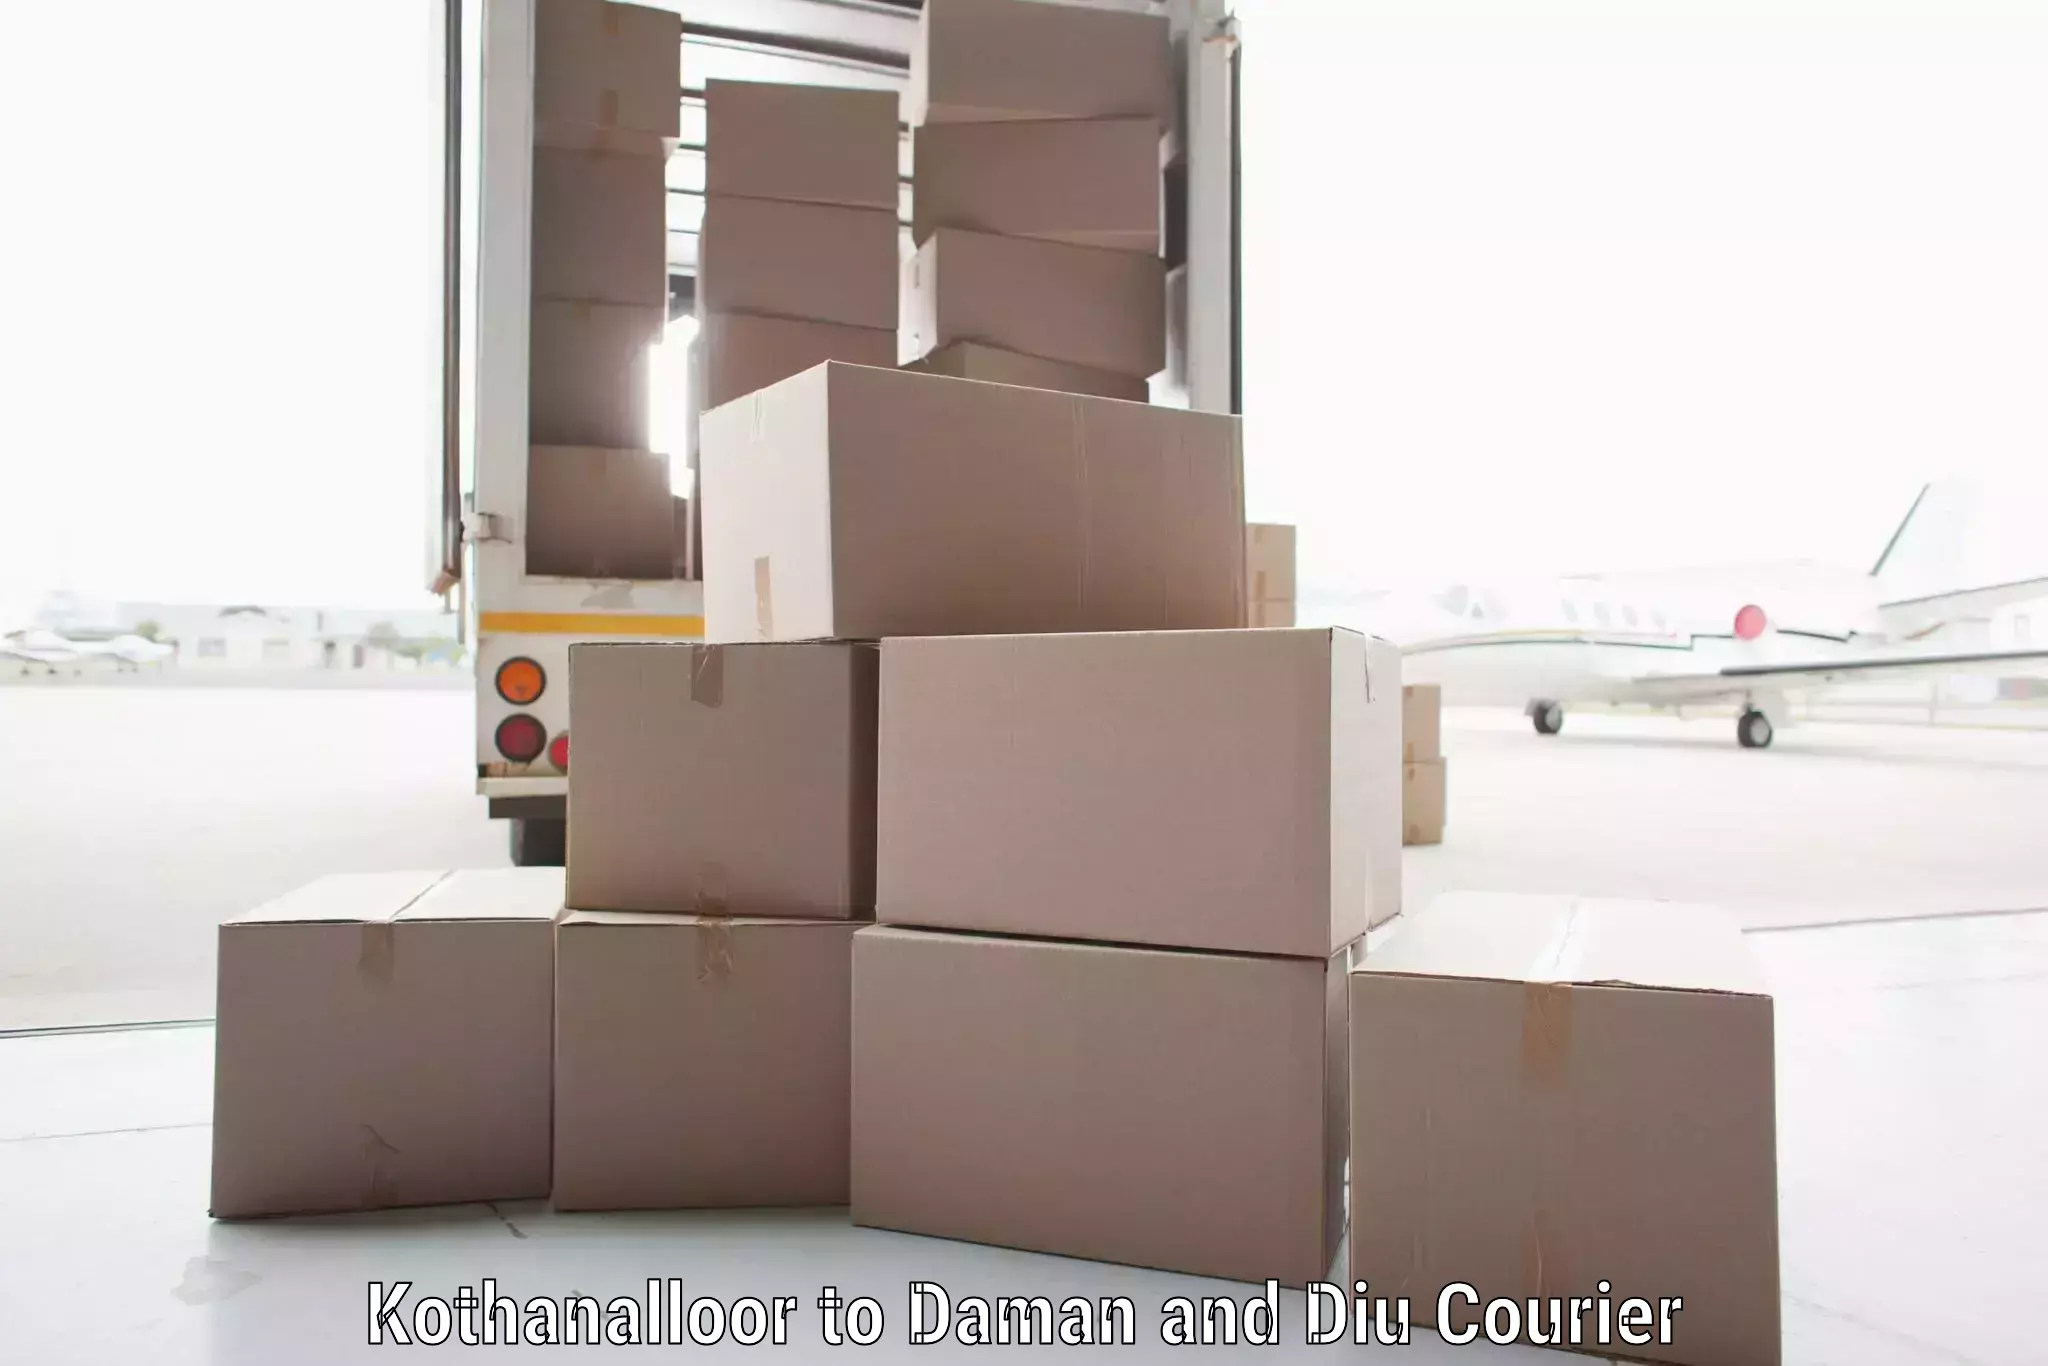 Quality courier services in Kothanalloor to Diu